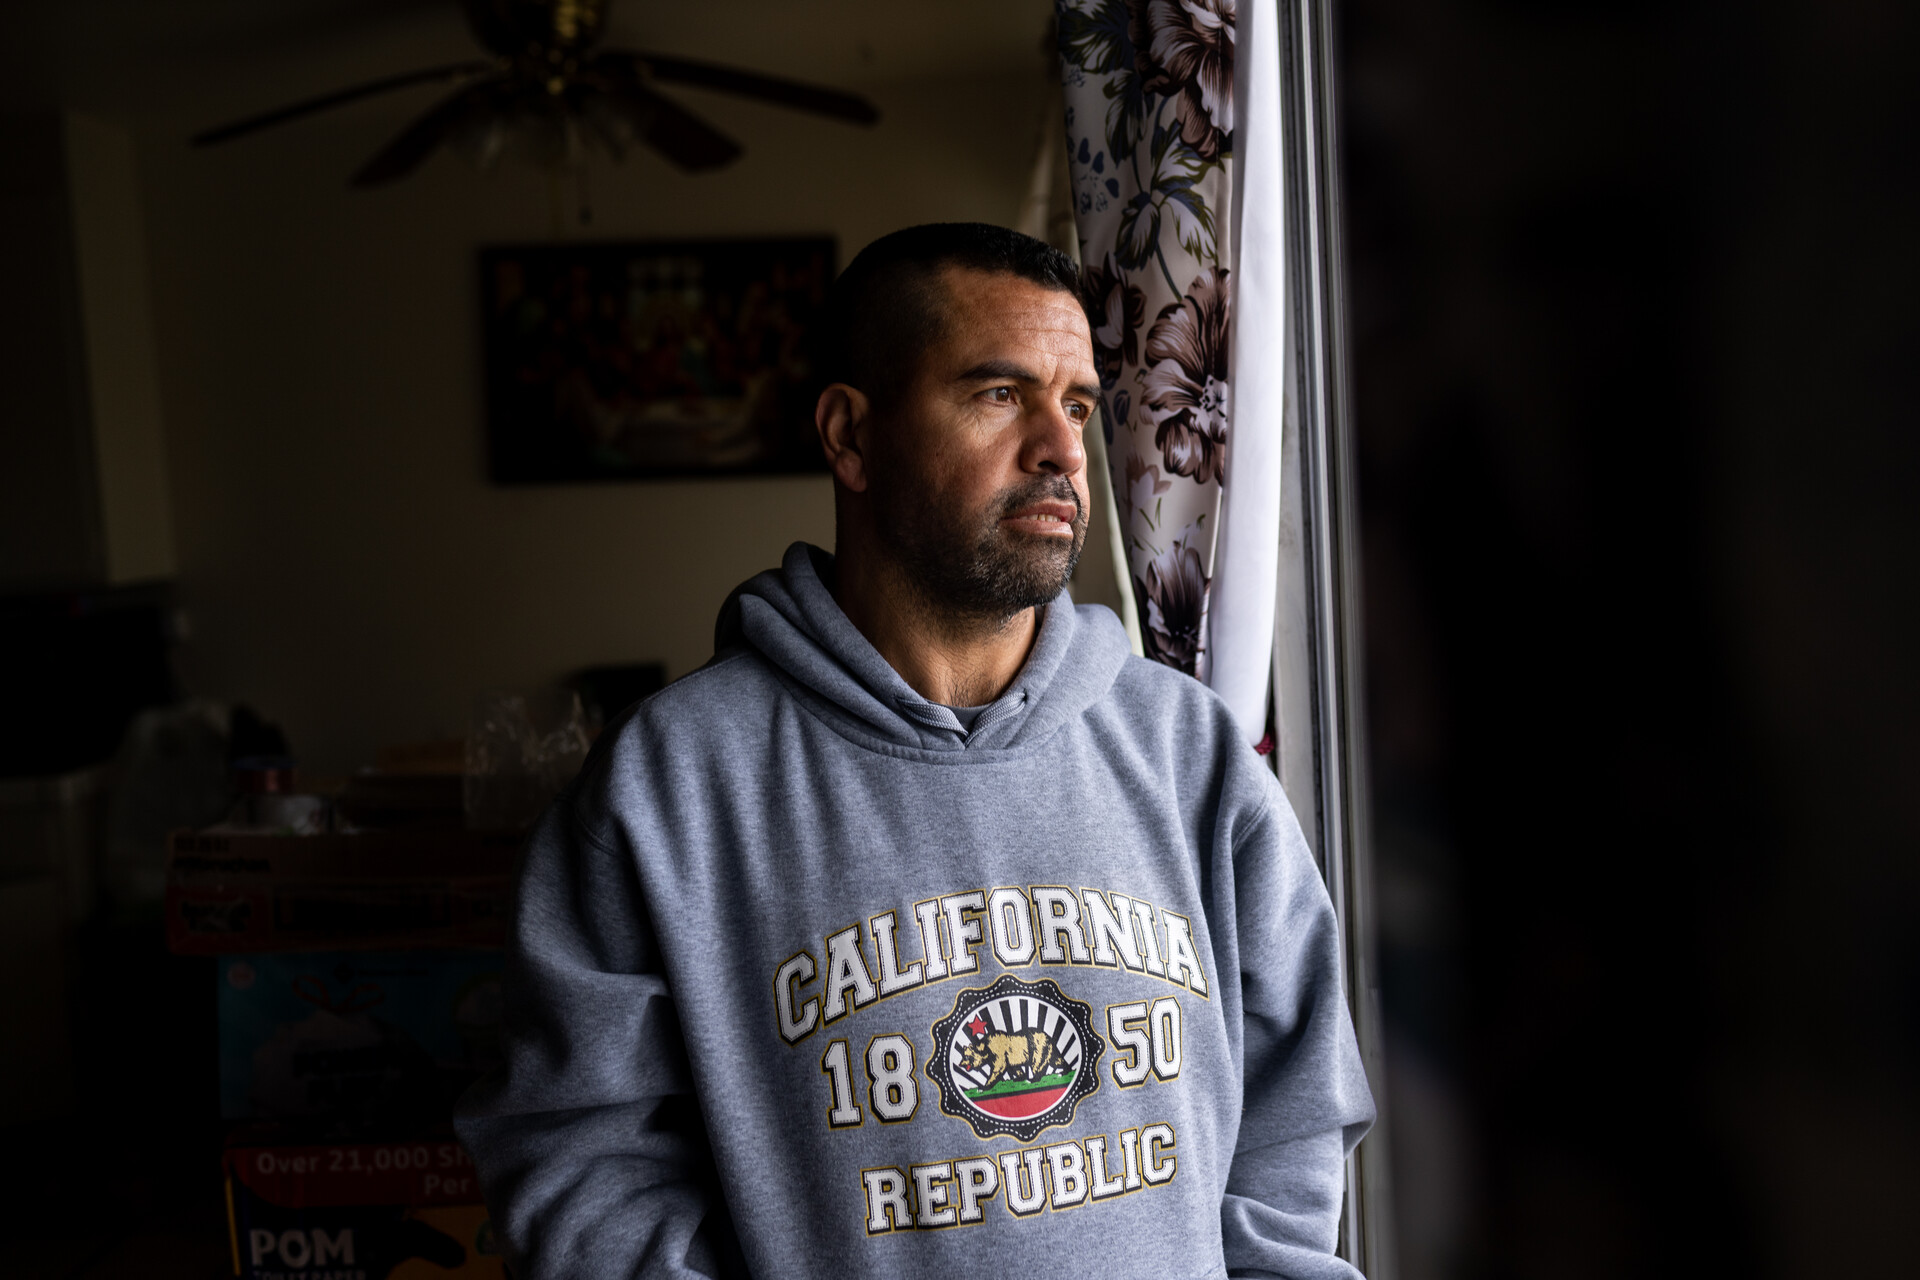 A man with short, dark hair and a five o'clock shadow wears a gray hooded sweatshirt that reads "California 1850 Republic" as he stares out the window from his apartment. The sunlight illuminates his serious face.